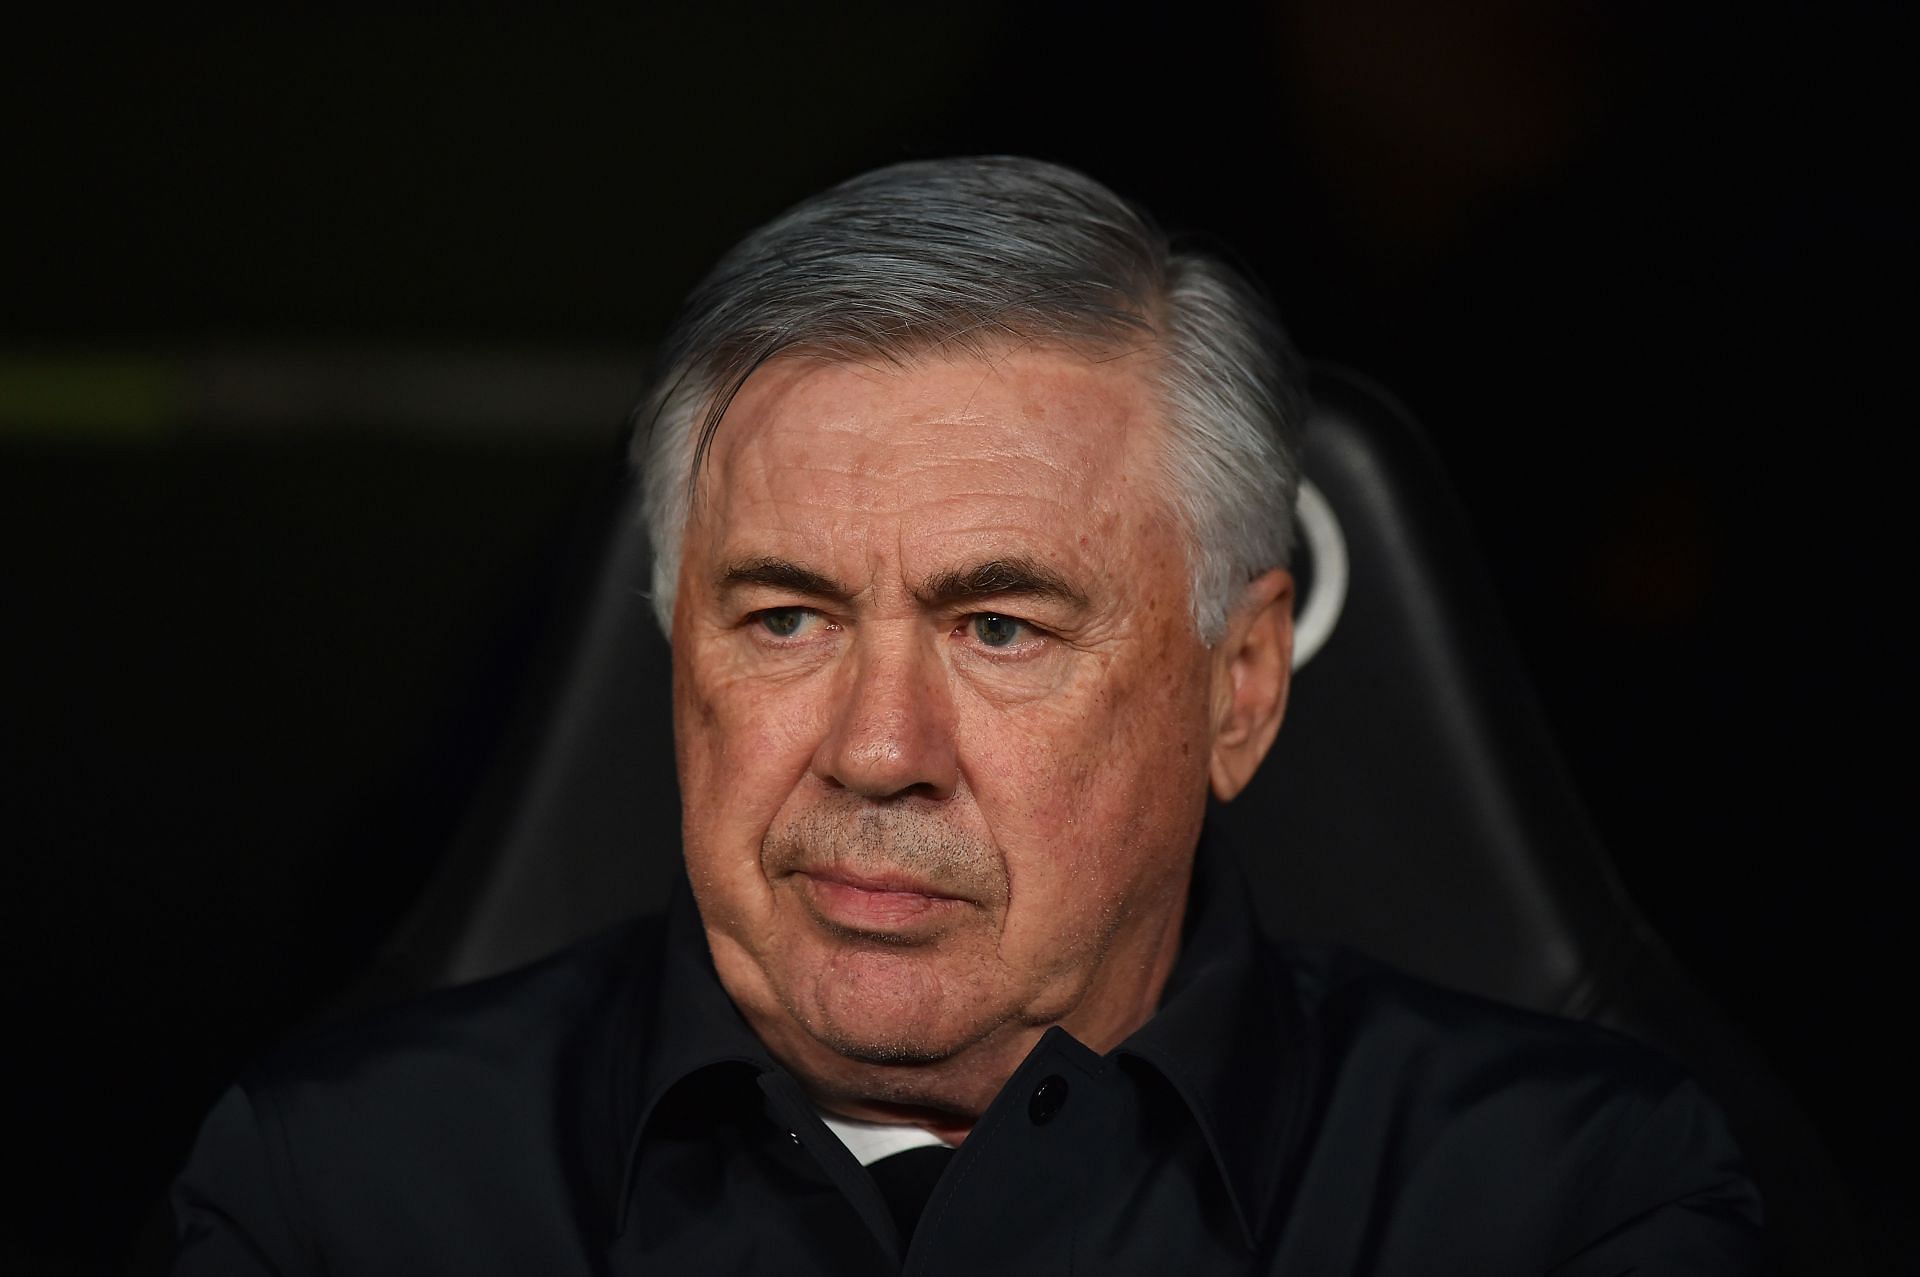 Carlo Ancelotti has an interest in the Manchester United job.